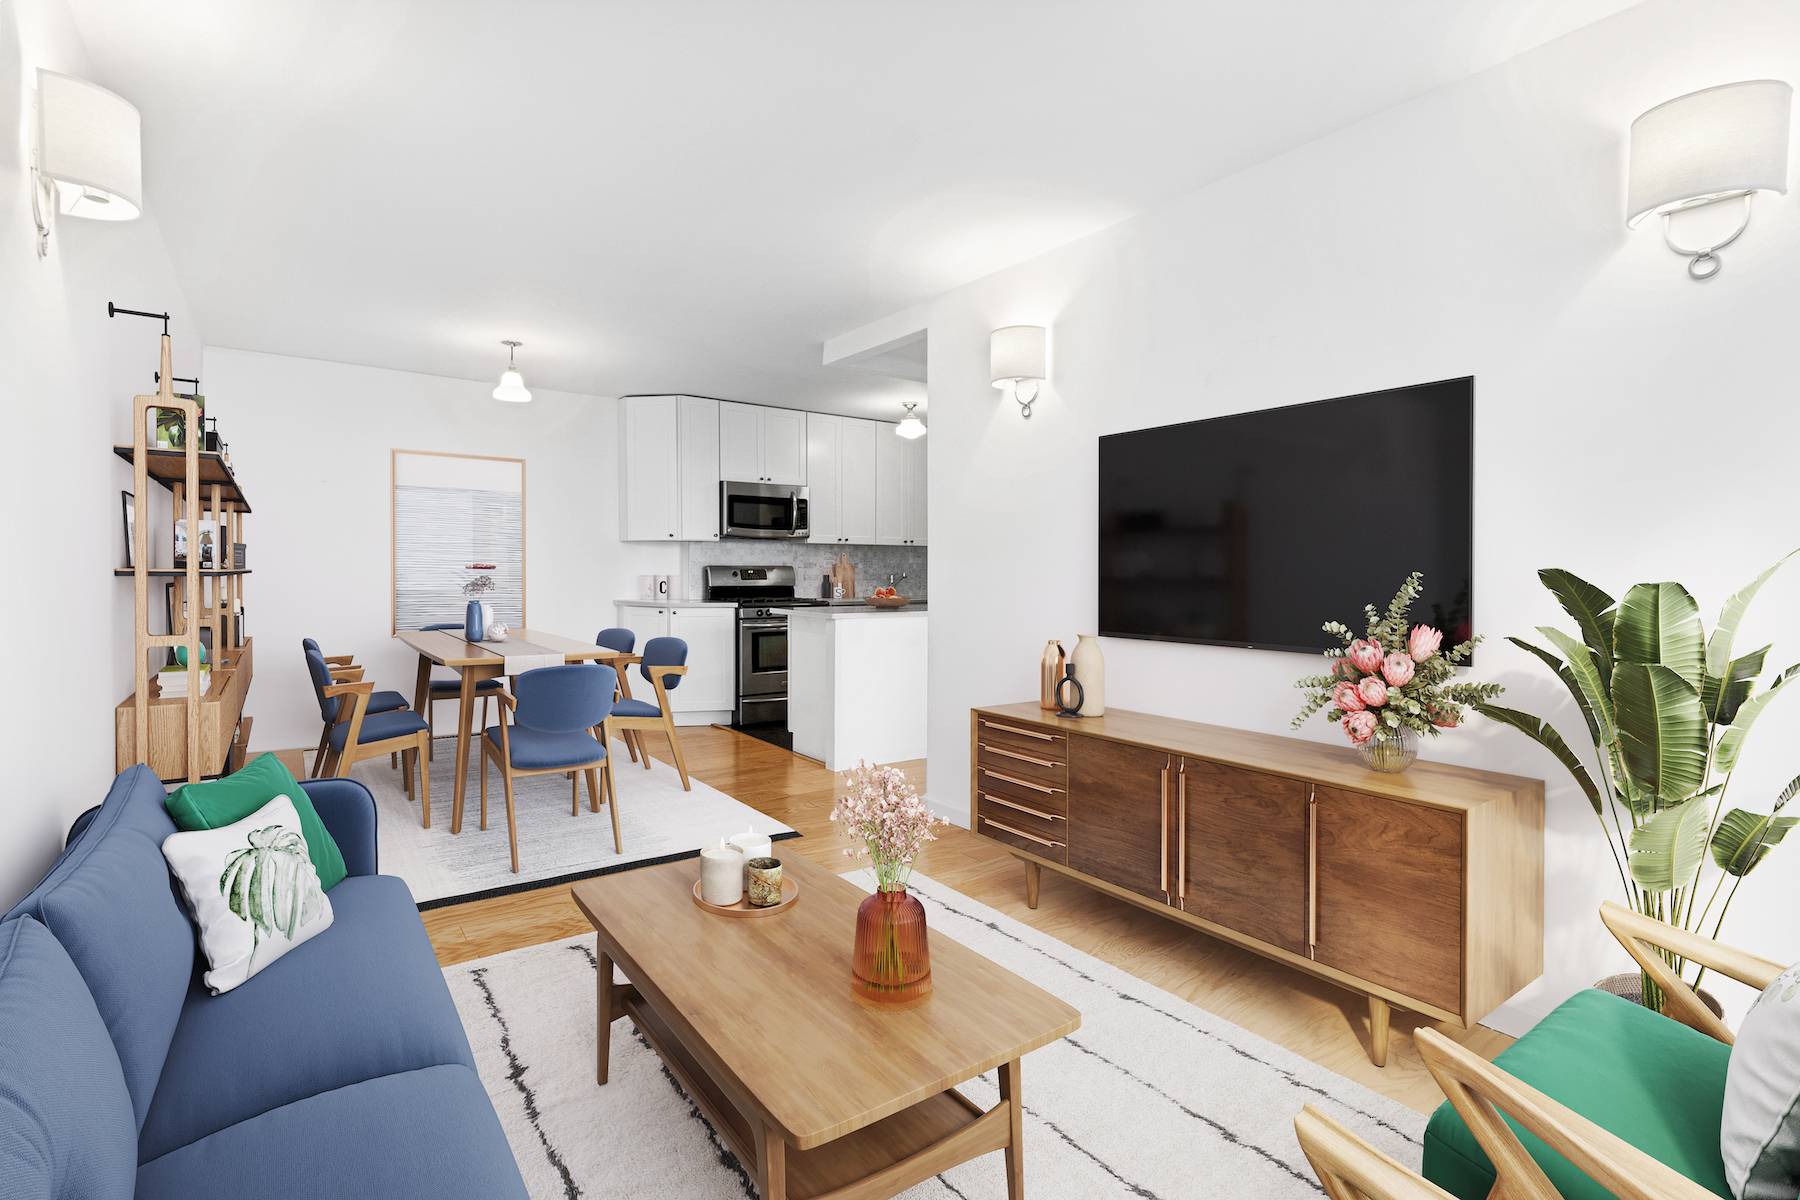 Nestled in the heart of the Upper East Side with exceptional Southern exposure and views, residence 9J is a tastefully renovated 1 bedroom 1 bathroom home.